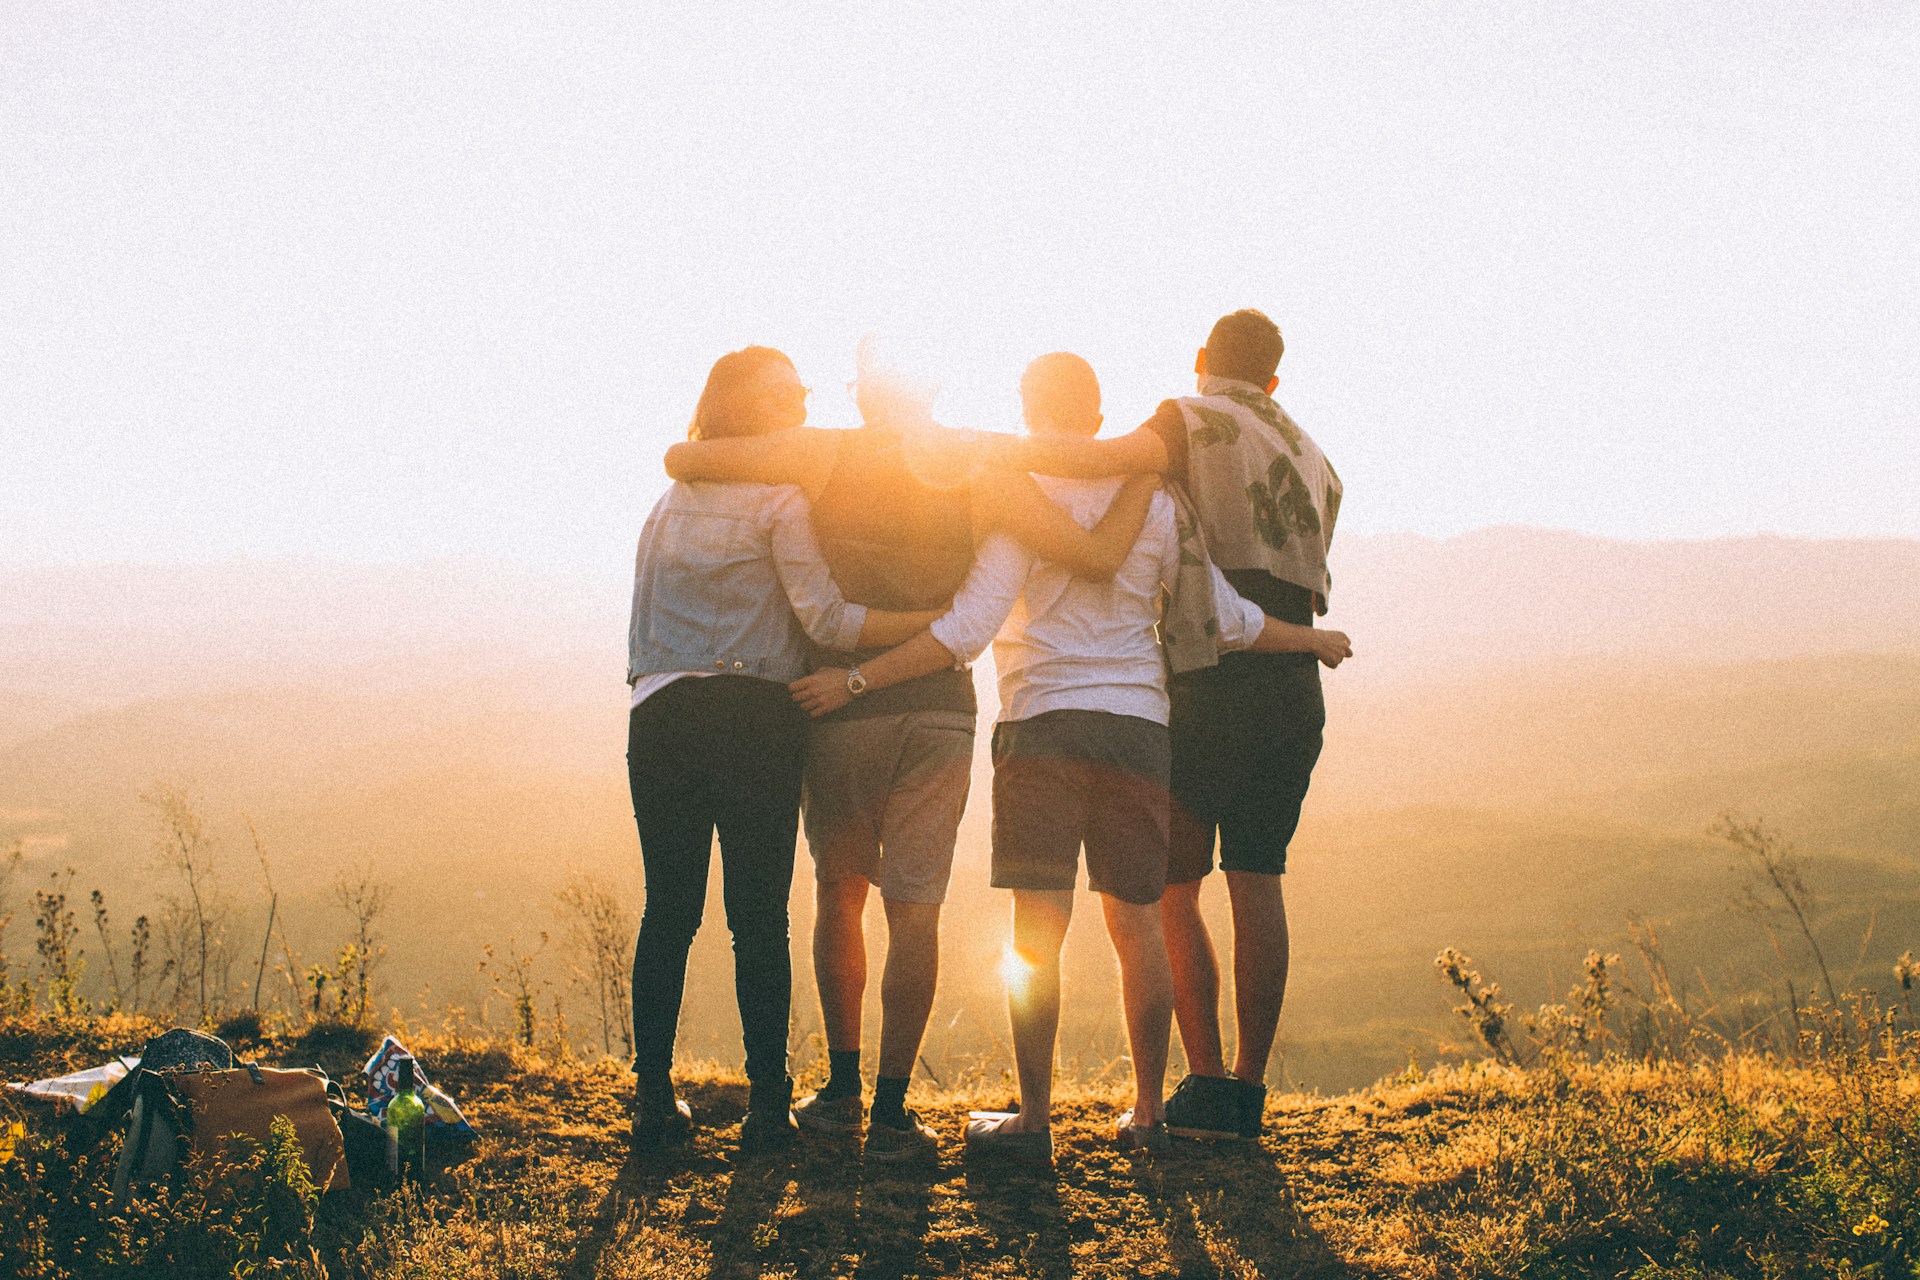 hiking with friends can help prevent DVT blood clots and varicose veins